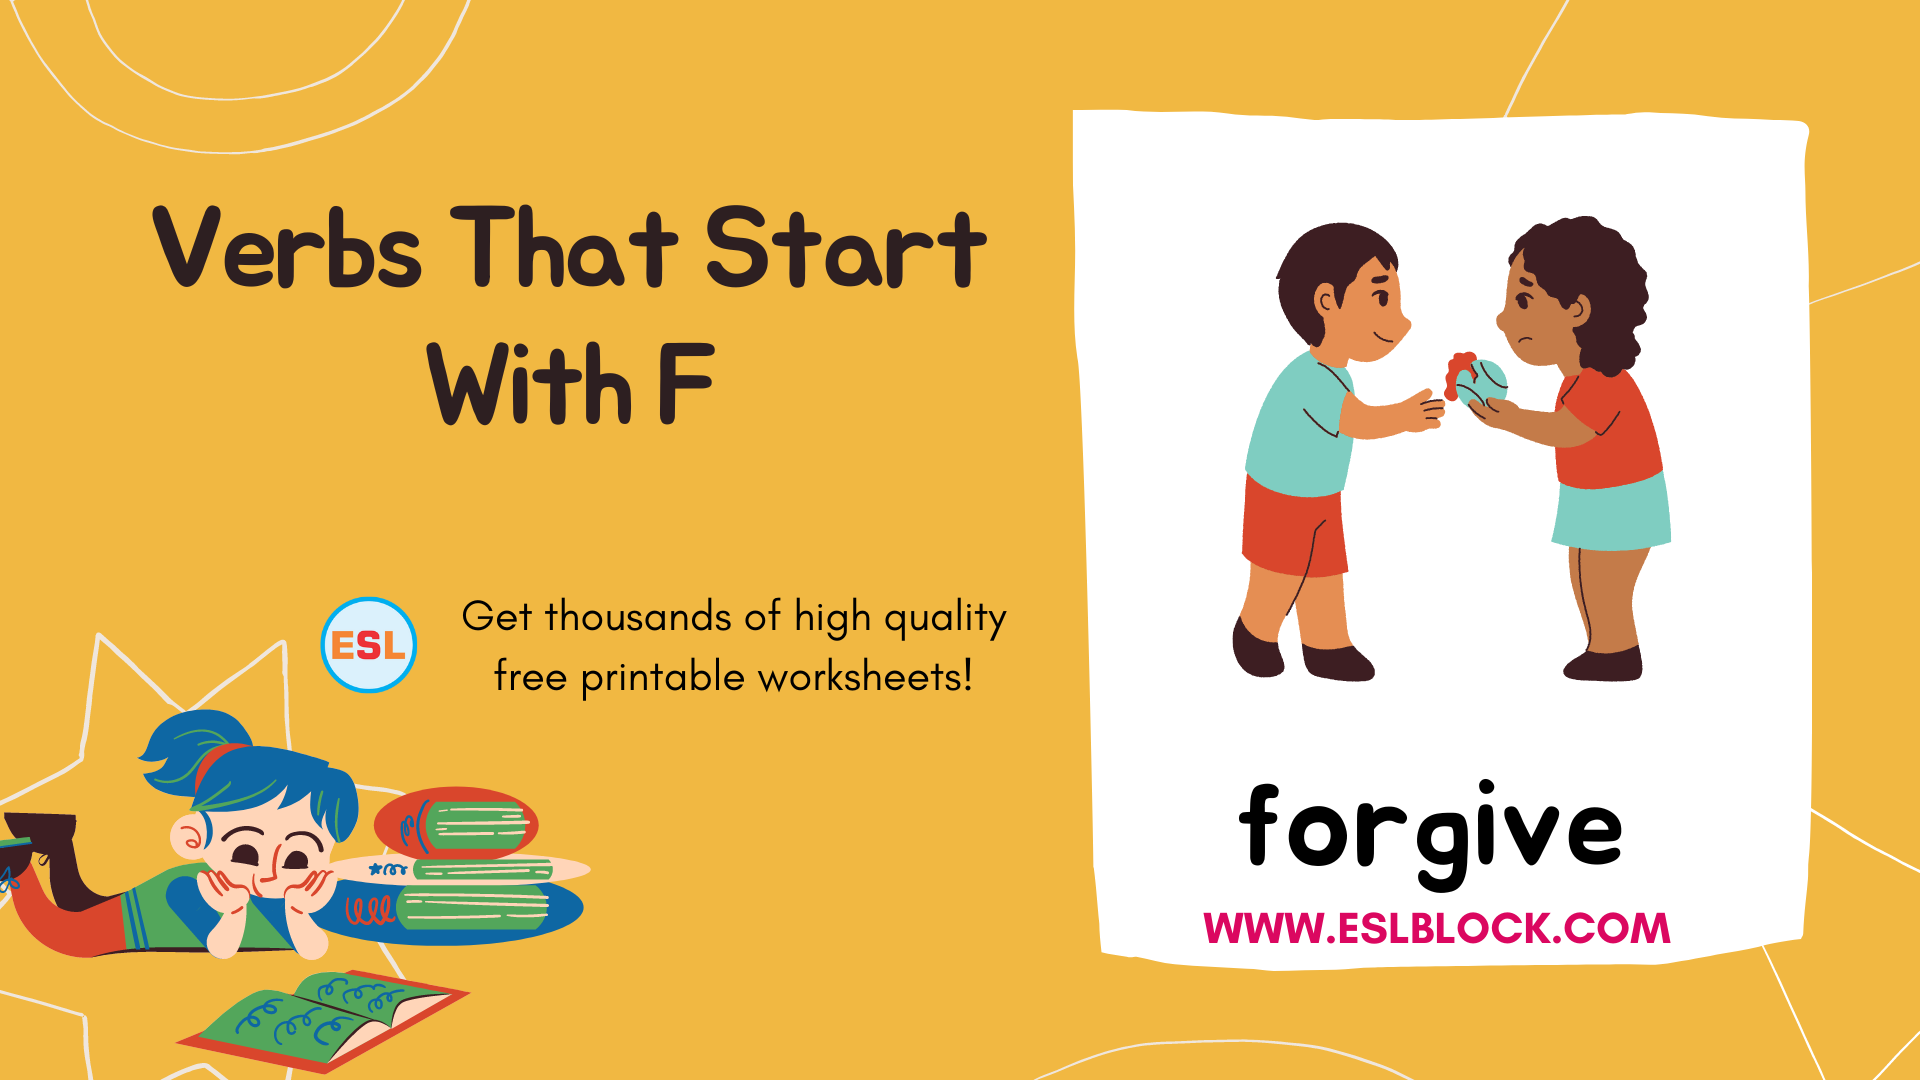 4 Letter Verbs, 5 Letter Verbs Starting With F, Action Words, Action Words That Start With F, English, English Grammar, English Vocabulary, English Words, F Action Words, F Verbs, F Verbs in English, List of Verbs That Start With F, Verbs List, Verbs That Start With F, Vocabulary, Words That Start With F